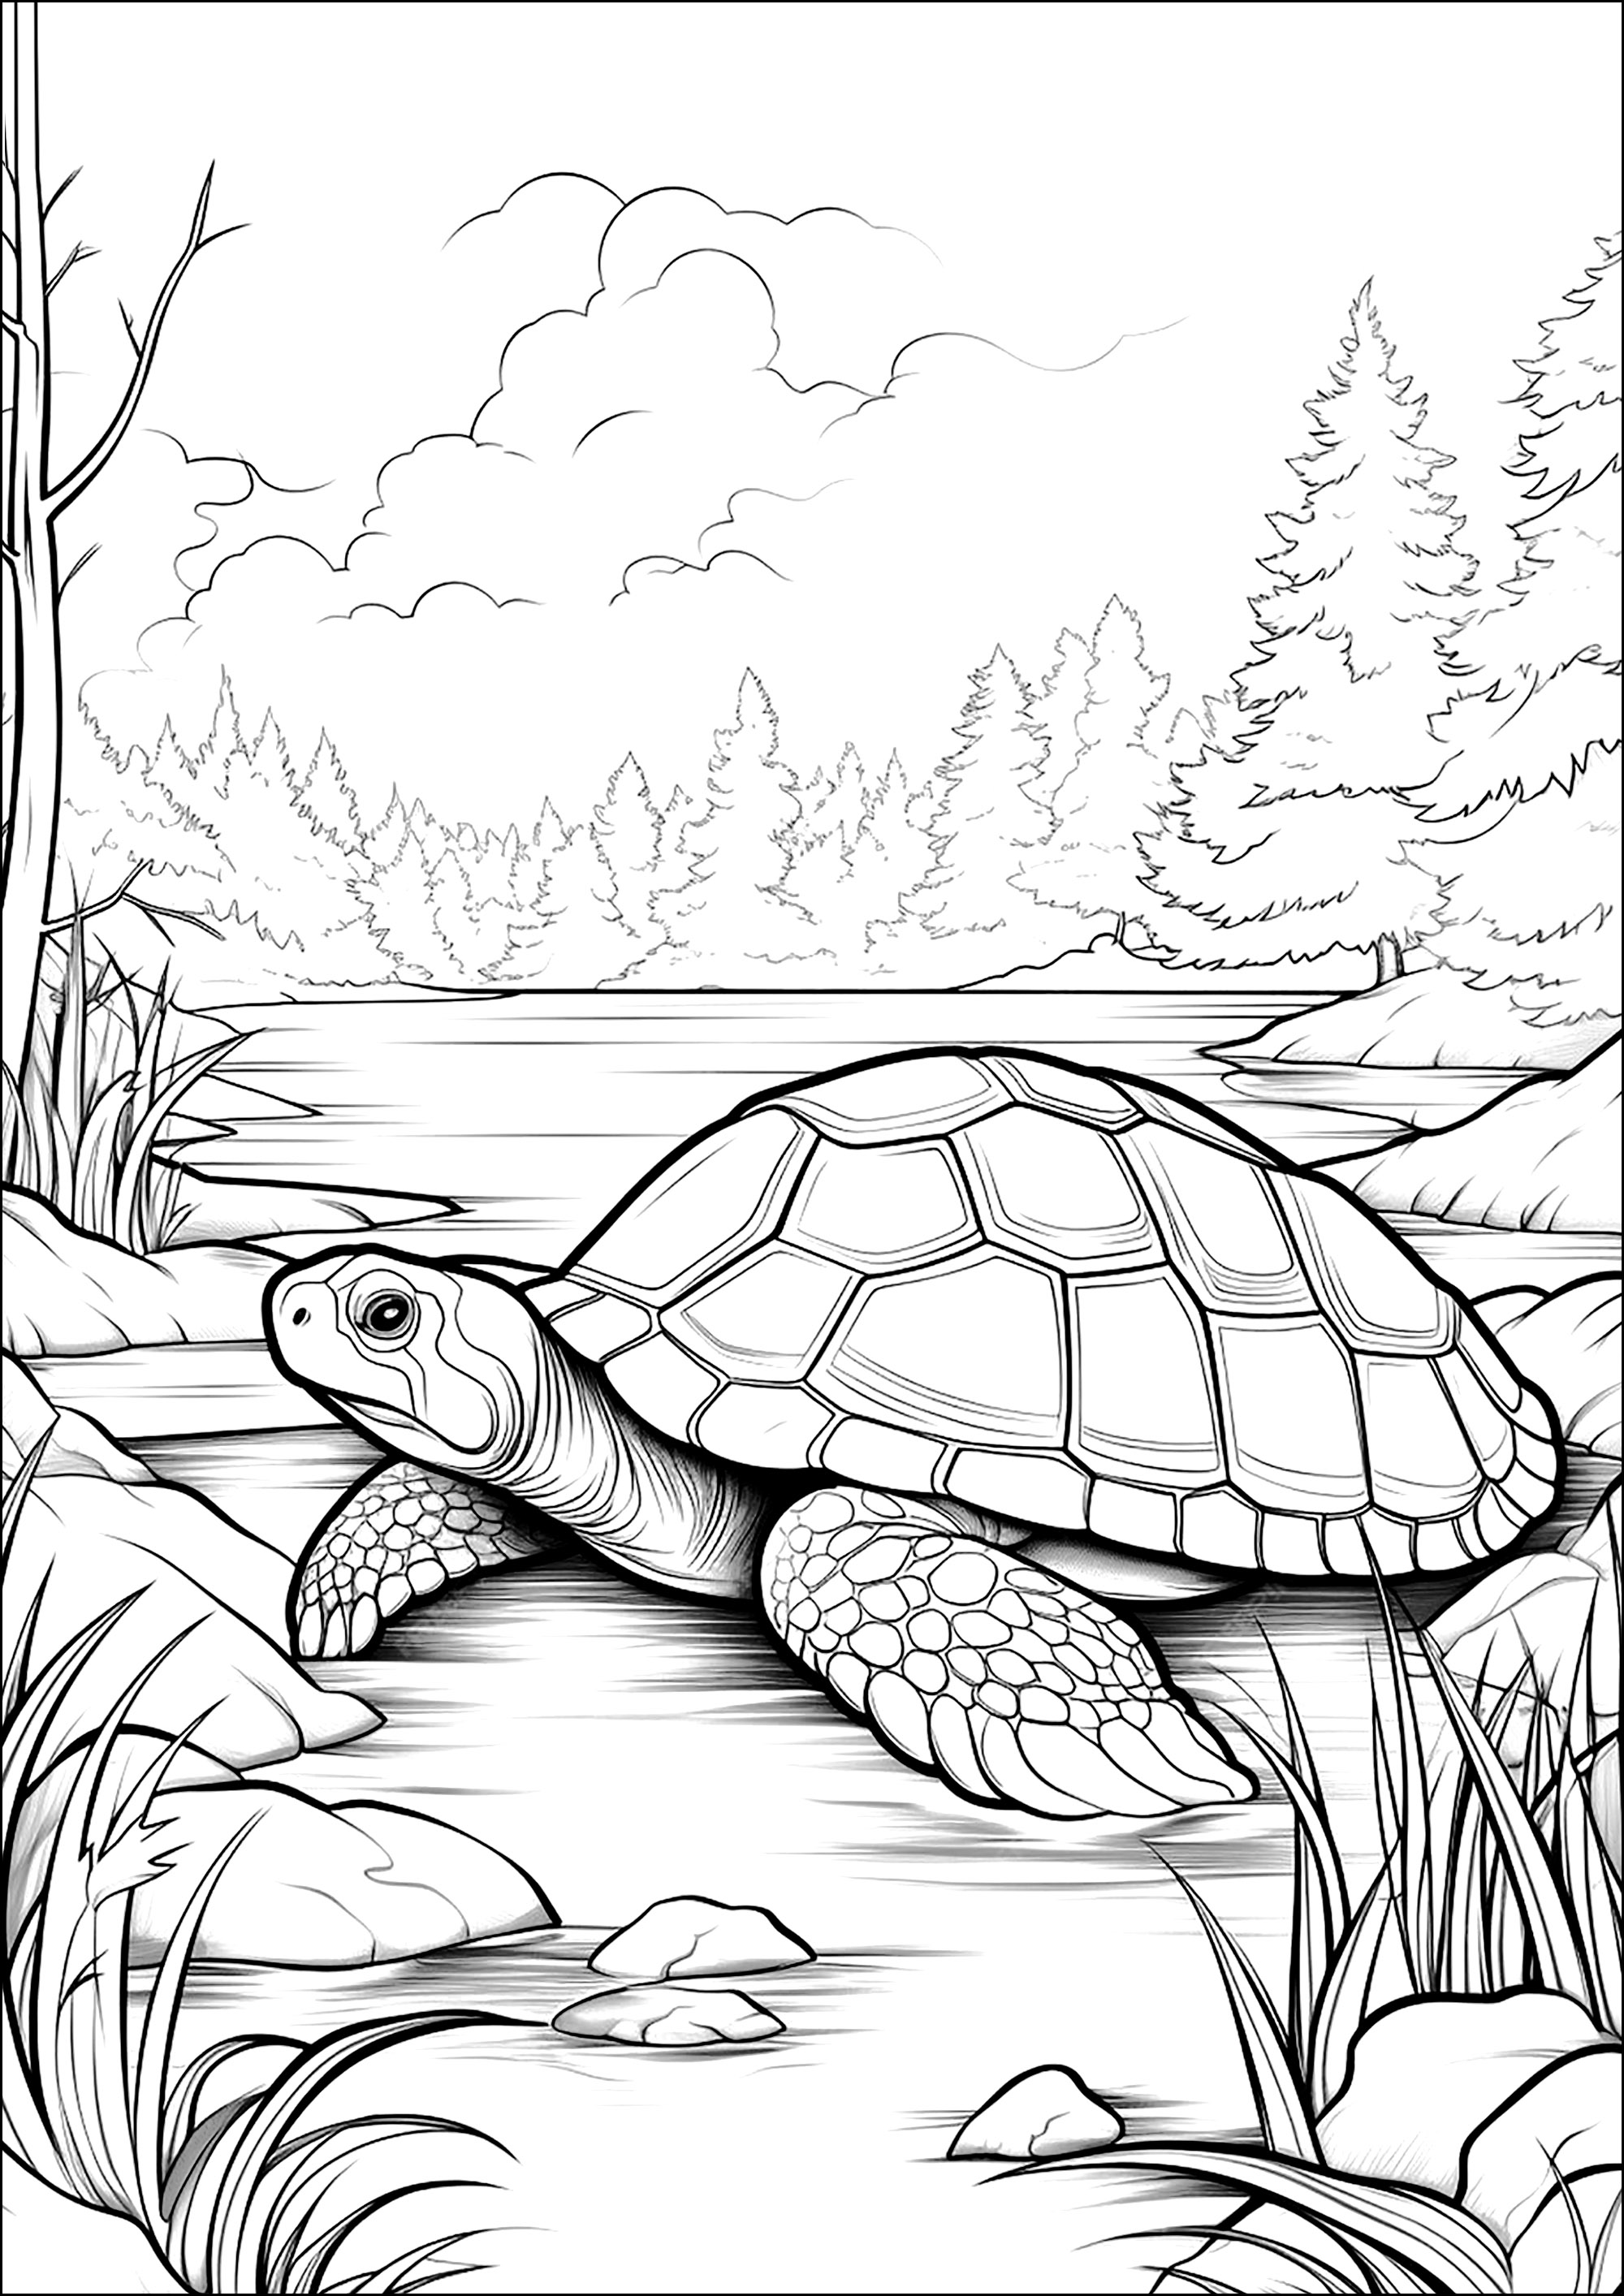 Beautiful turtle on a walk. Lots of details to color in the background